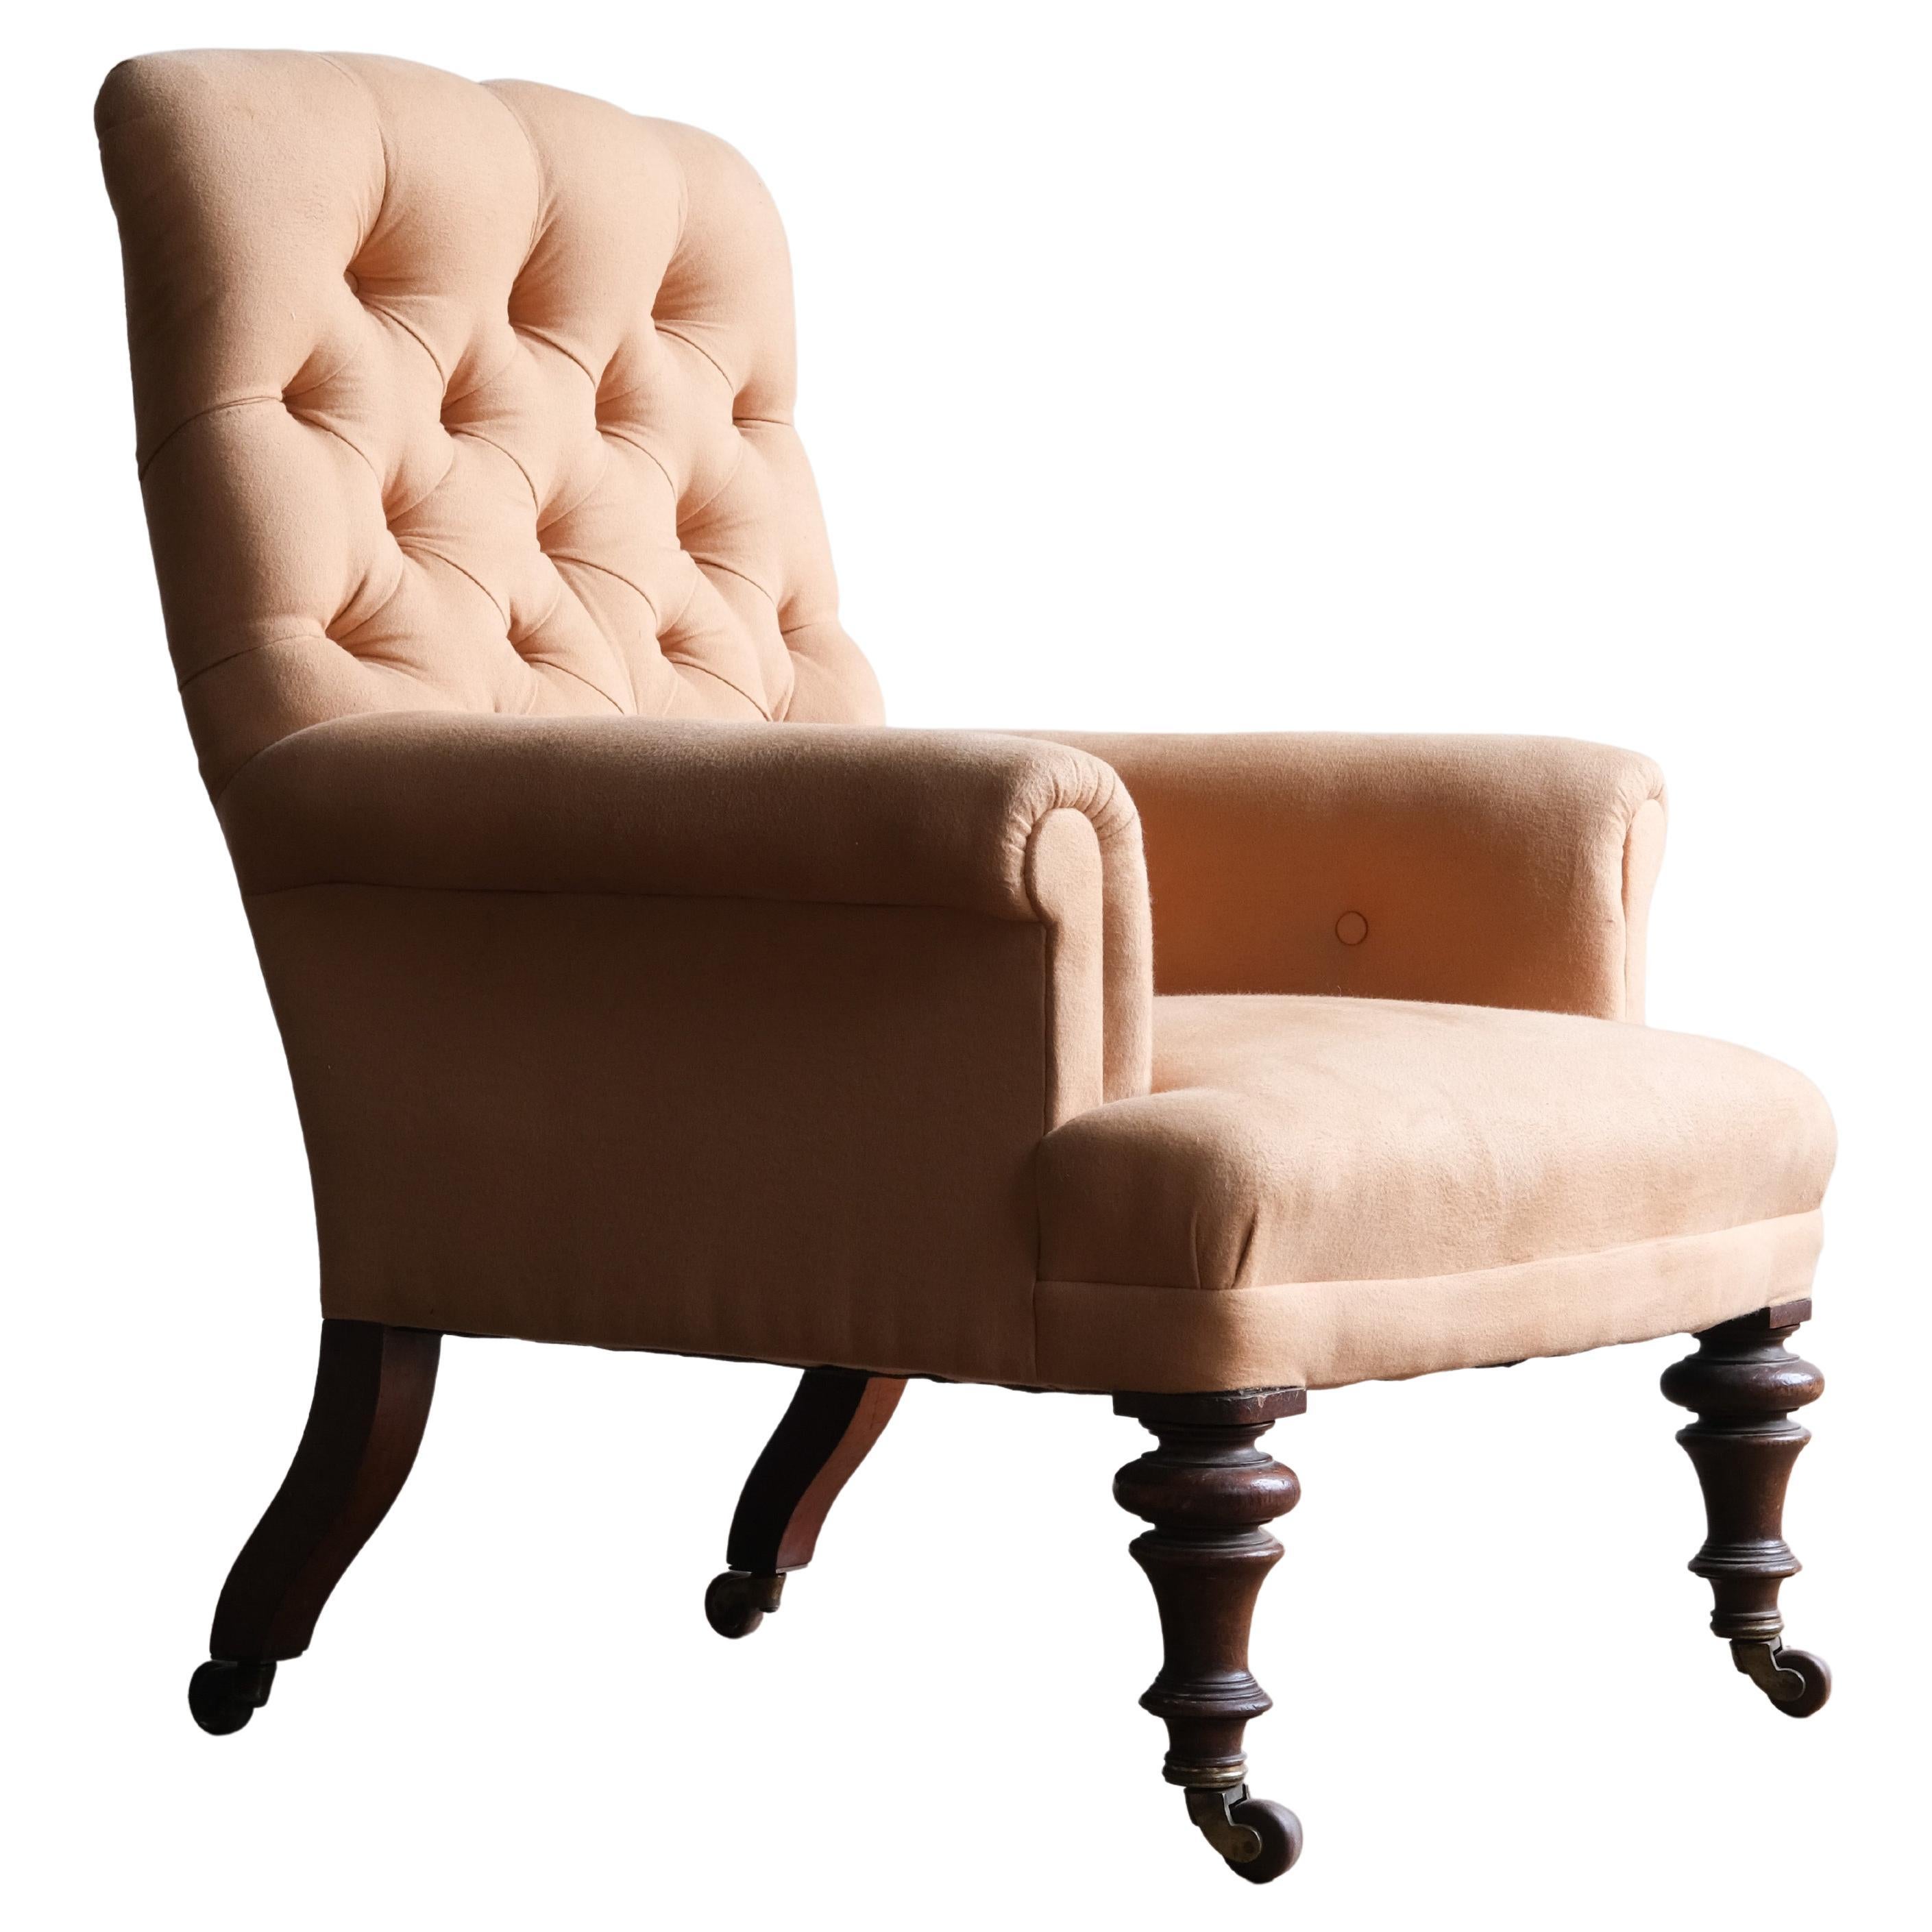 19th Century English Armchair by Constantine & Co, Leeds